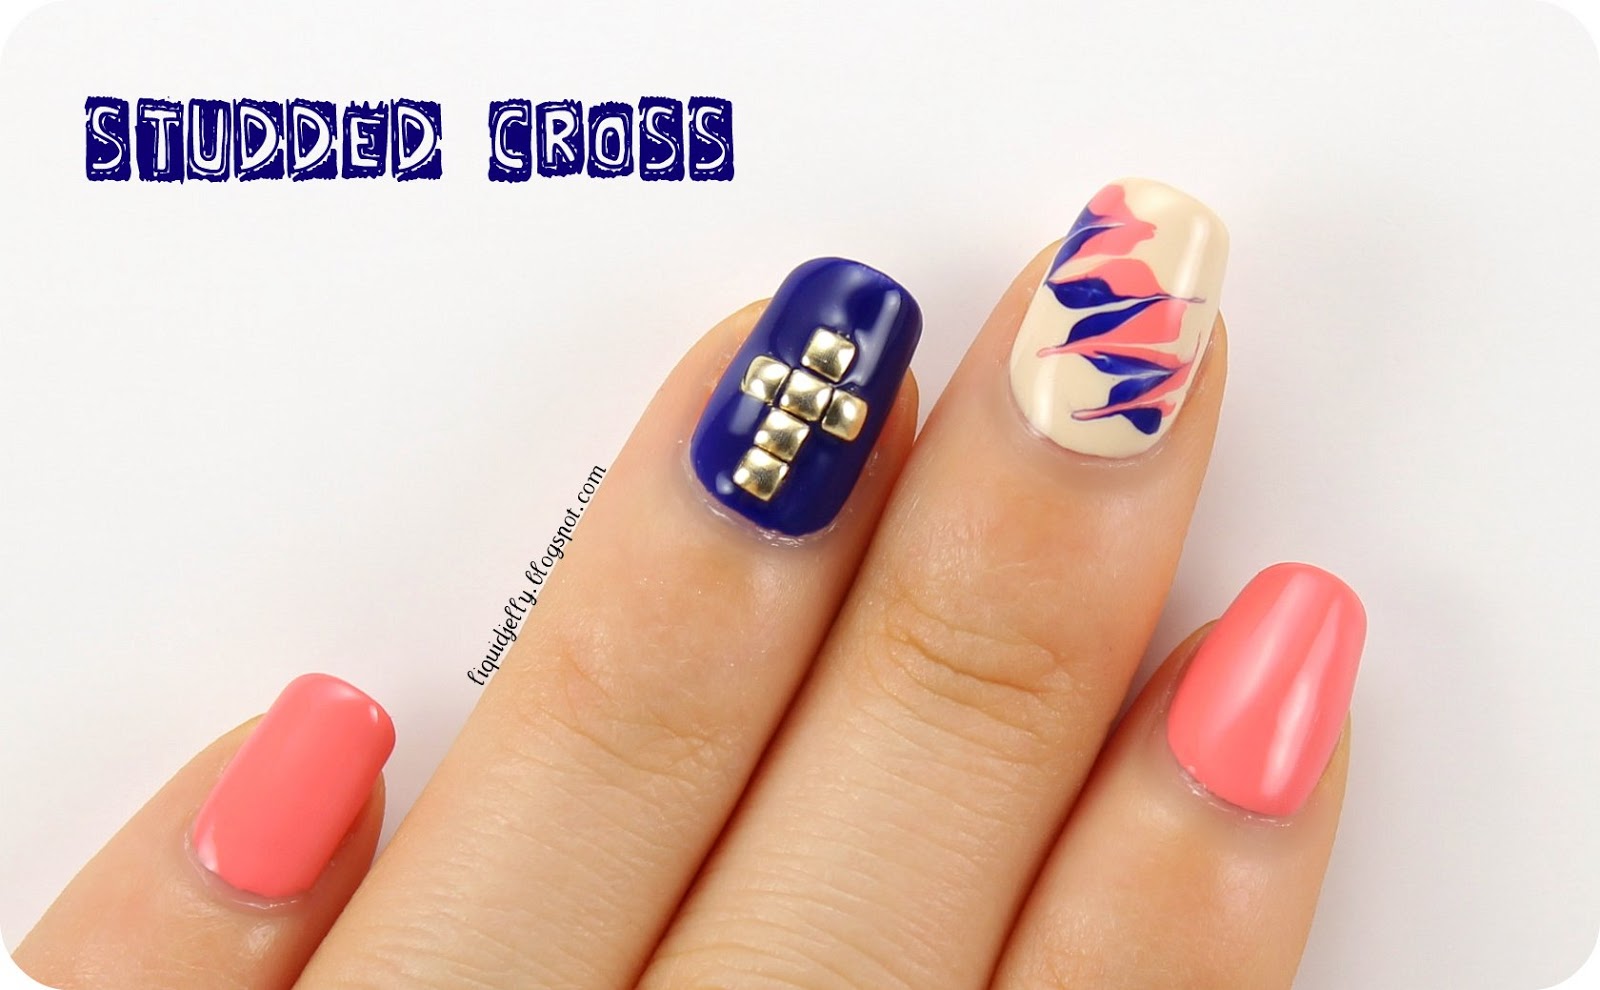 1. Cross Nail Art Designs for Short Nails - wide 8